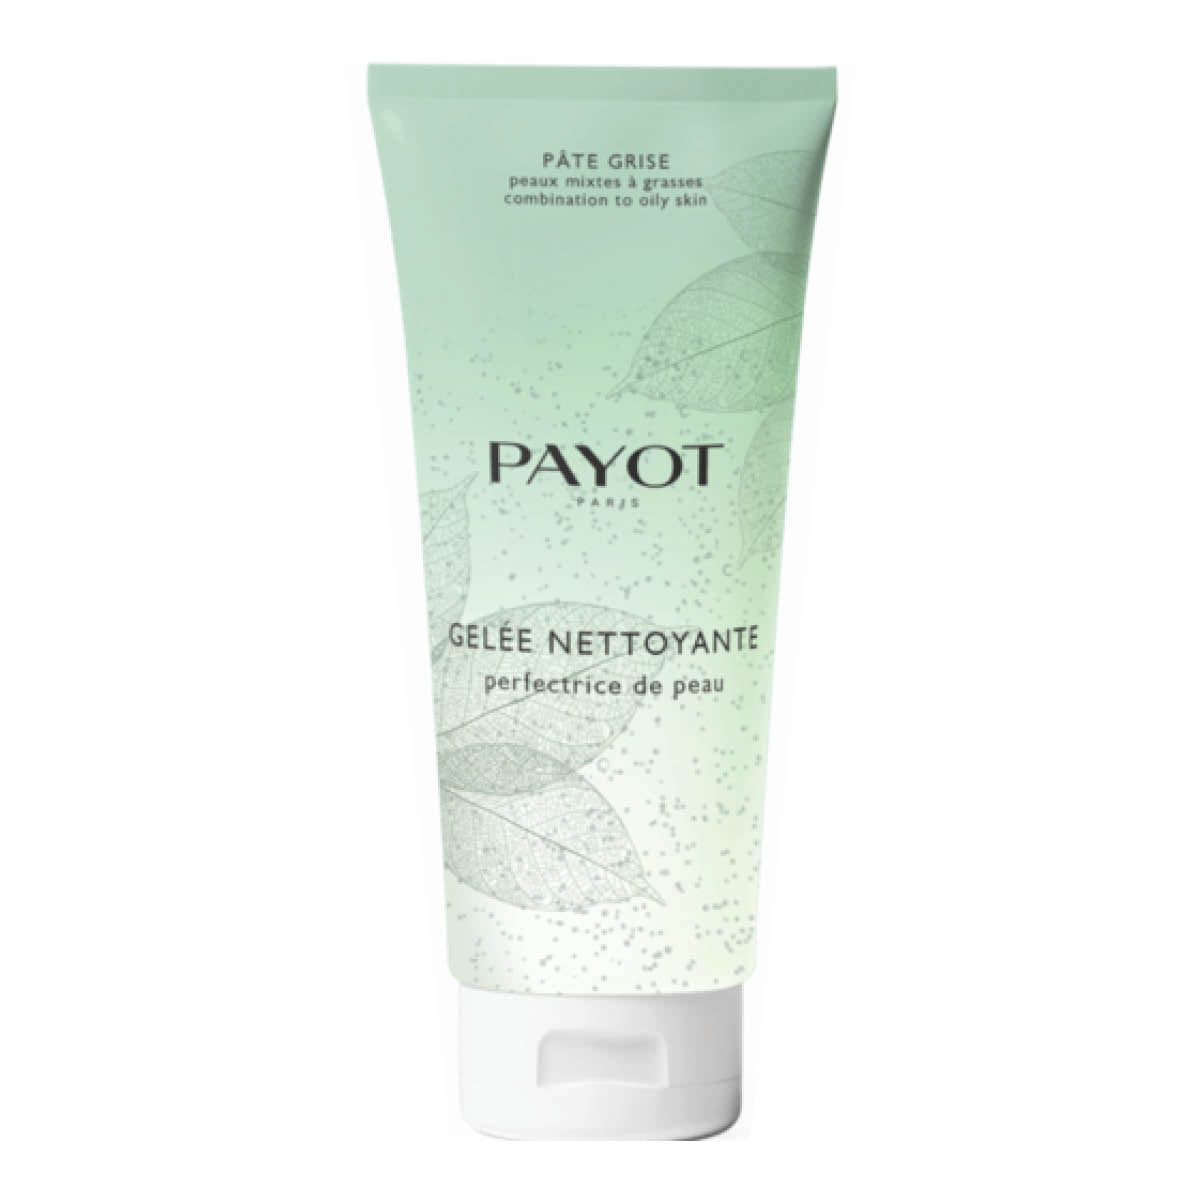 Payot Gelee Nettoyant Purifying Foaming Gel Cleanser 200ml